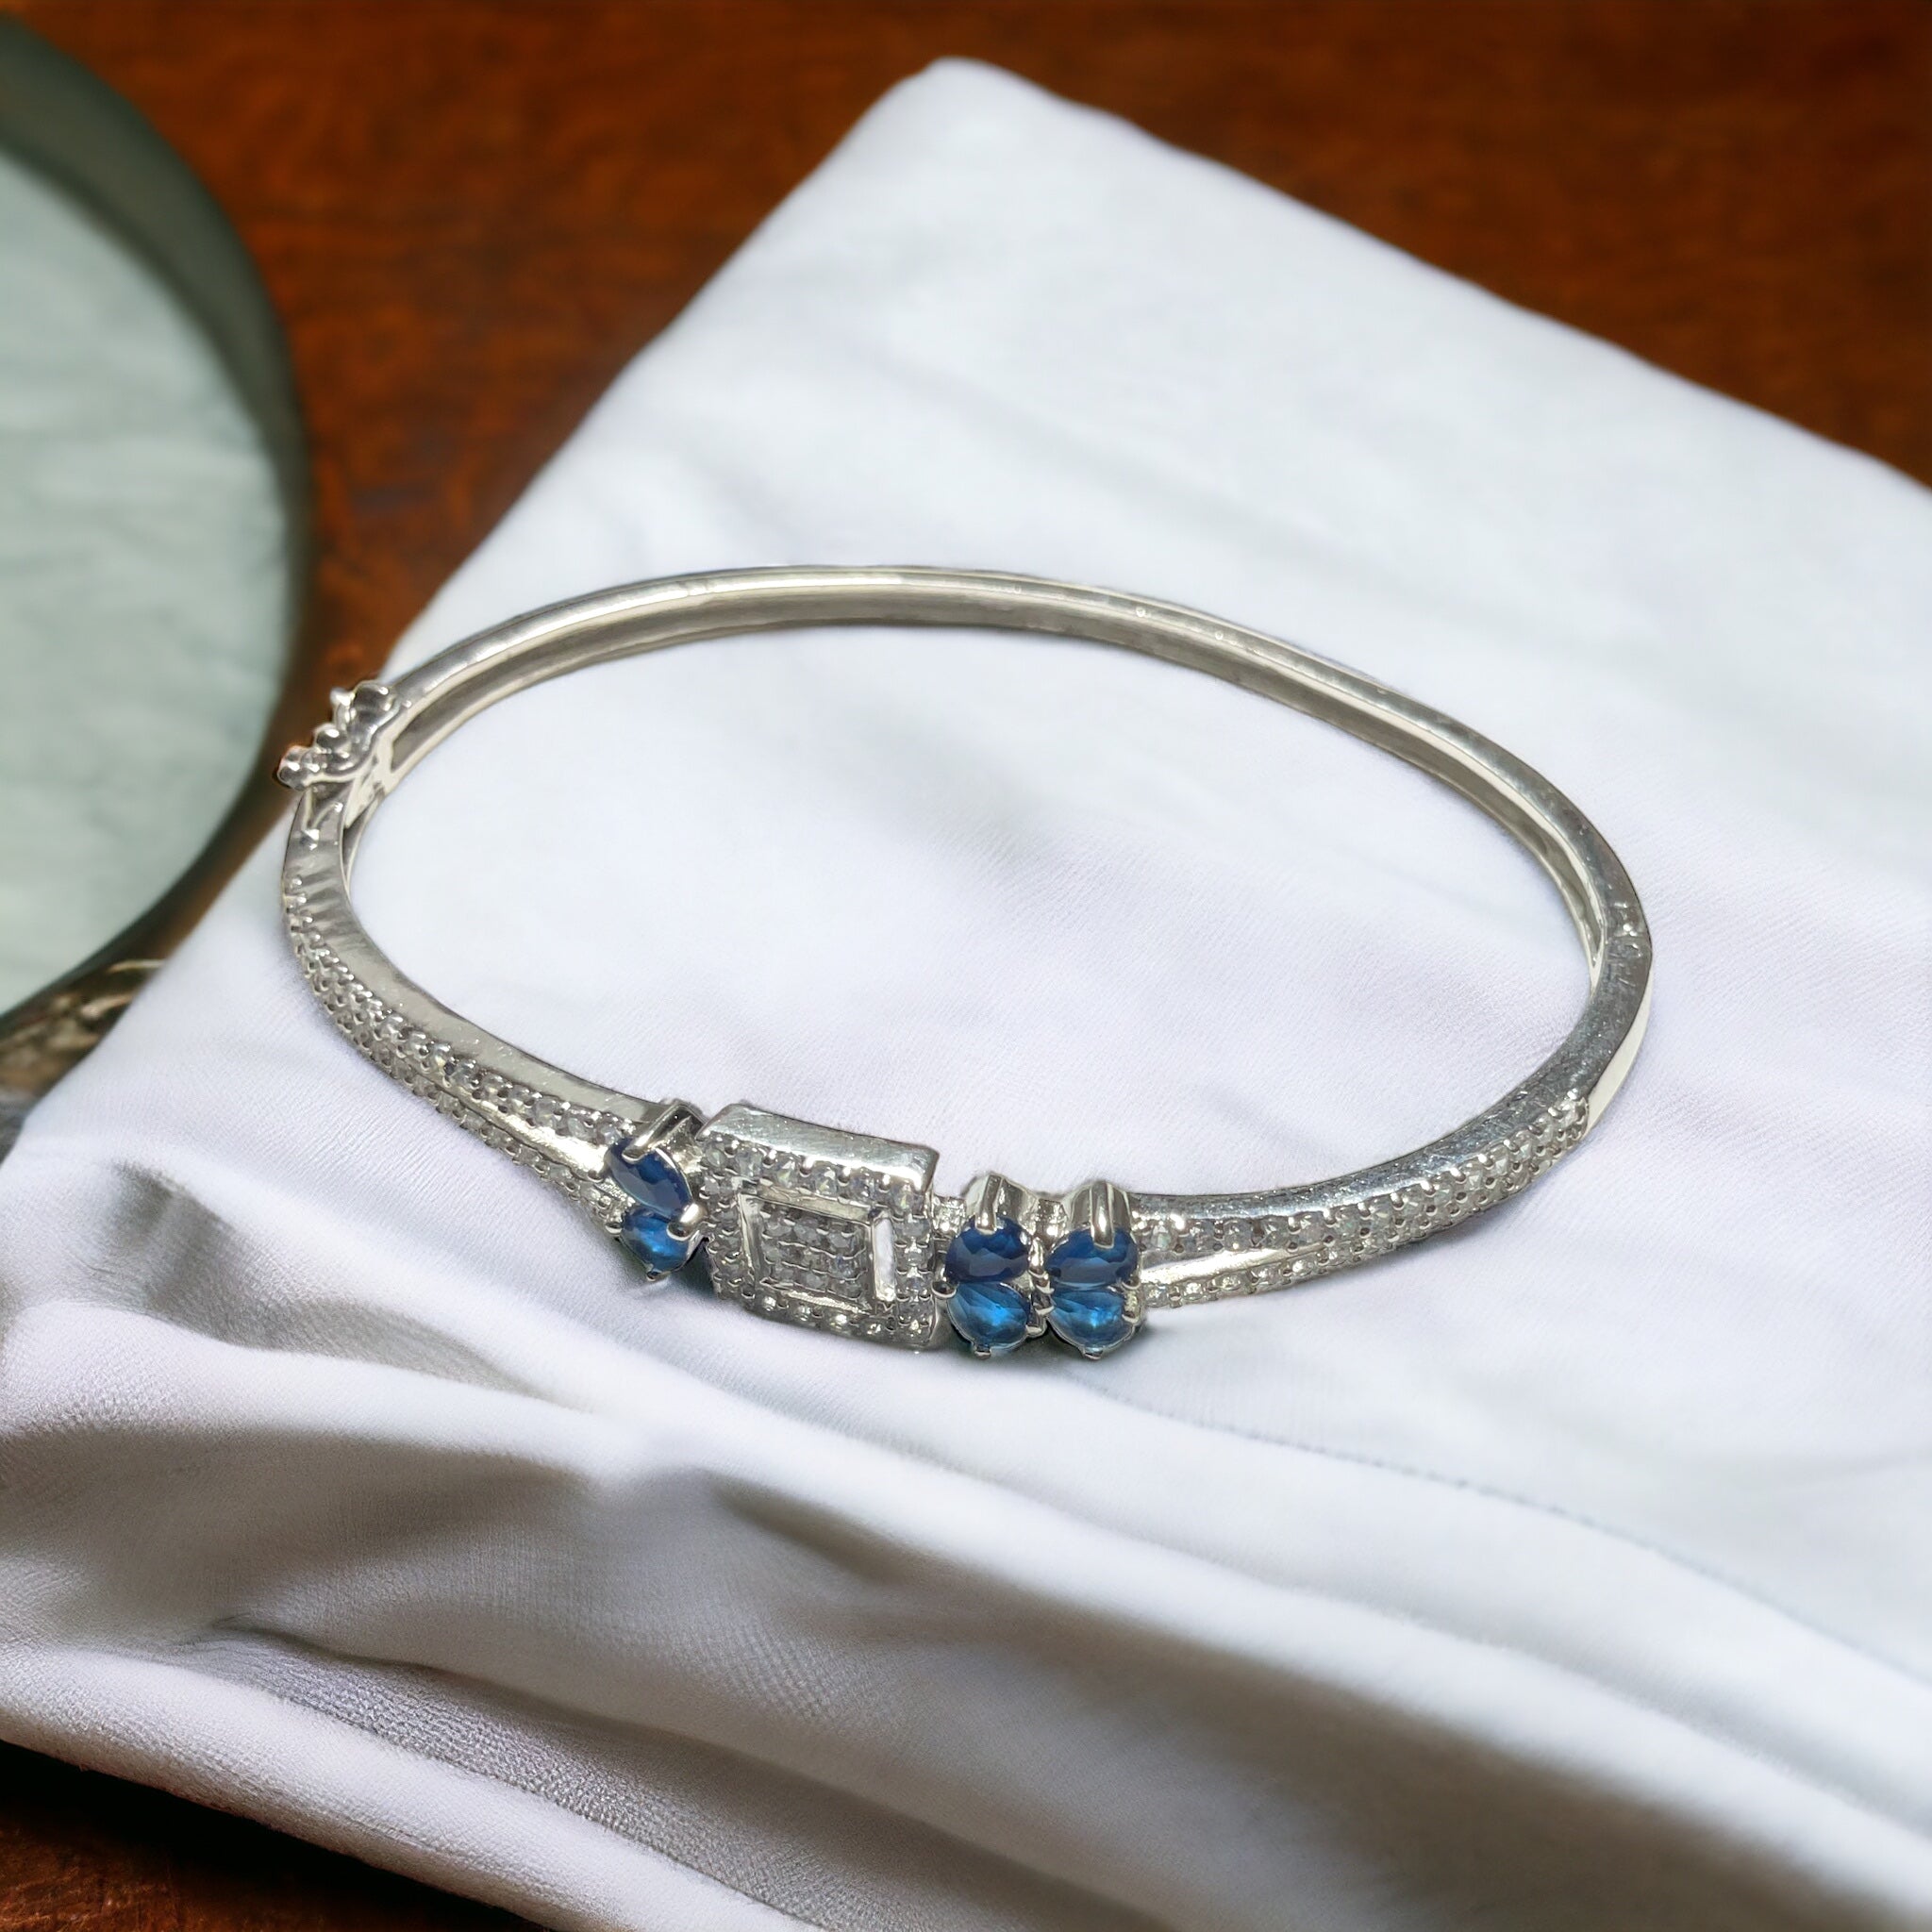 a silver bracelet with blue stones on it